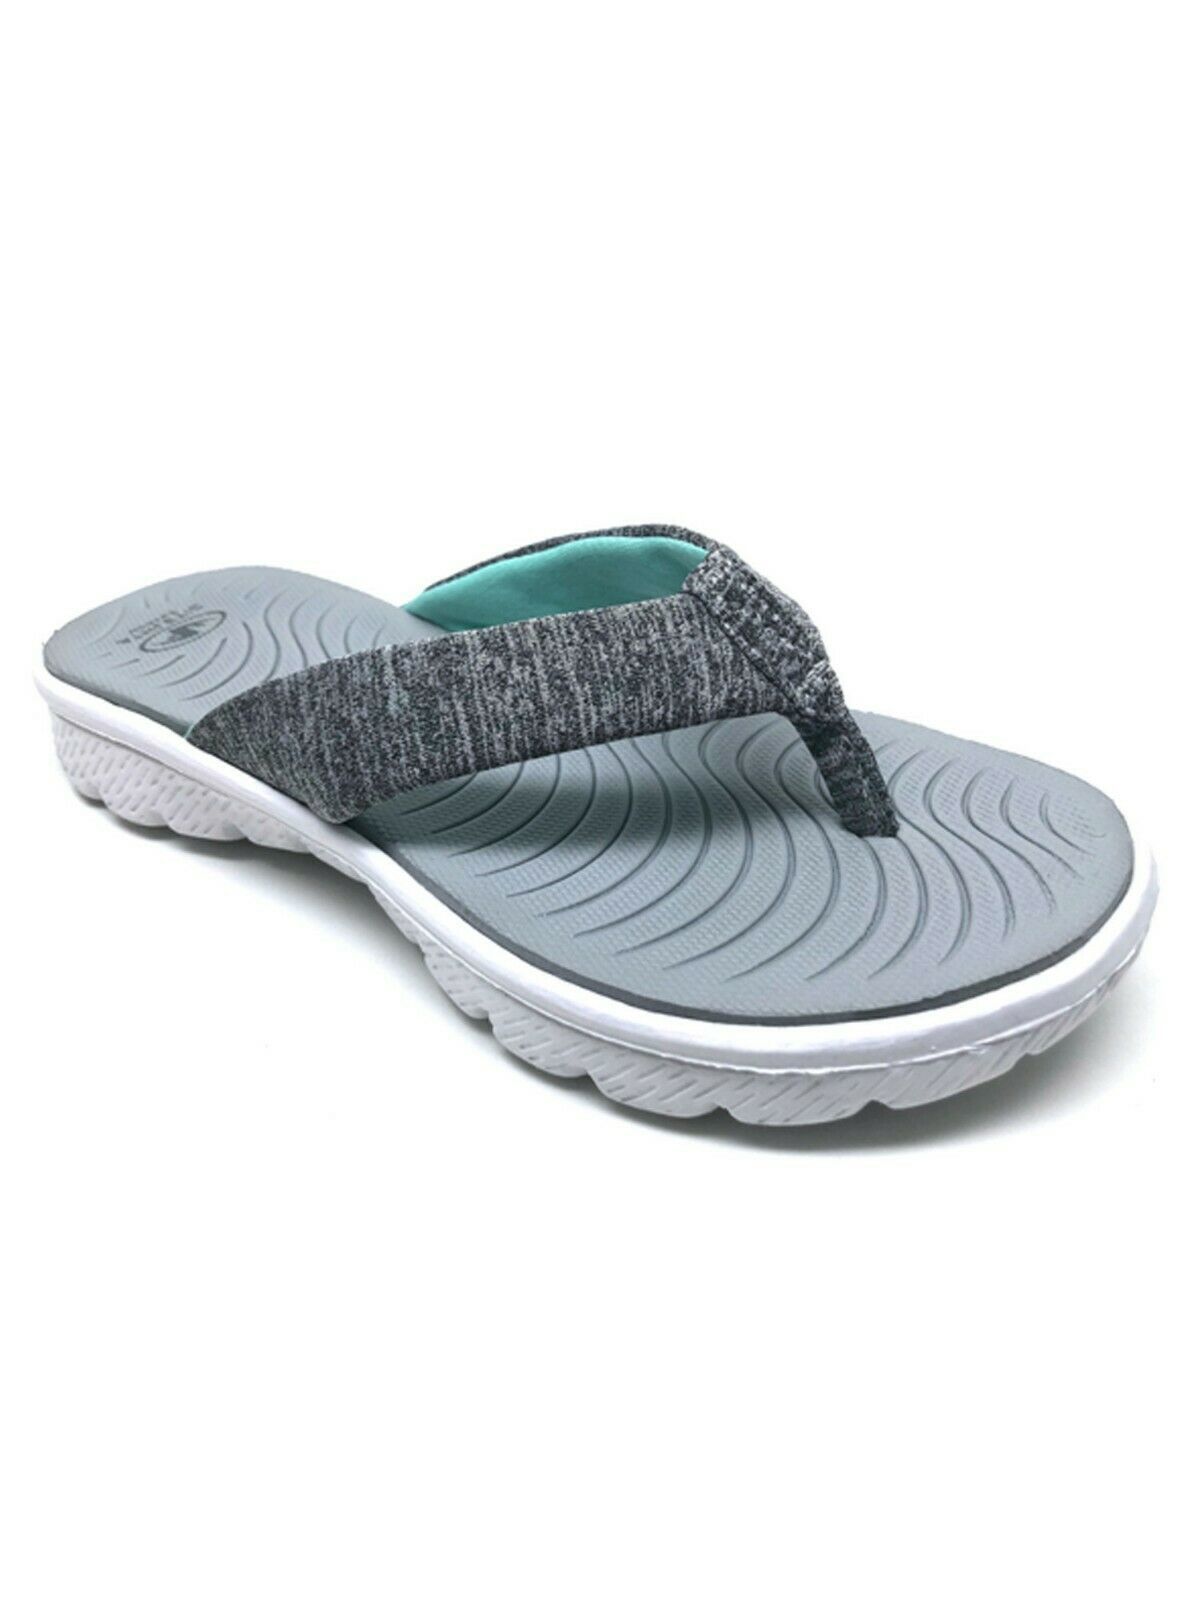 Athletic Works Women's Thong Sandal Flip Flop Size 11/12 Gray White ...